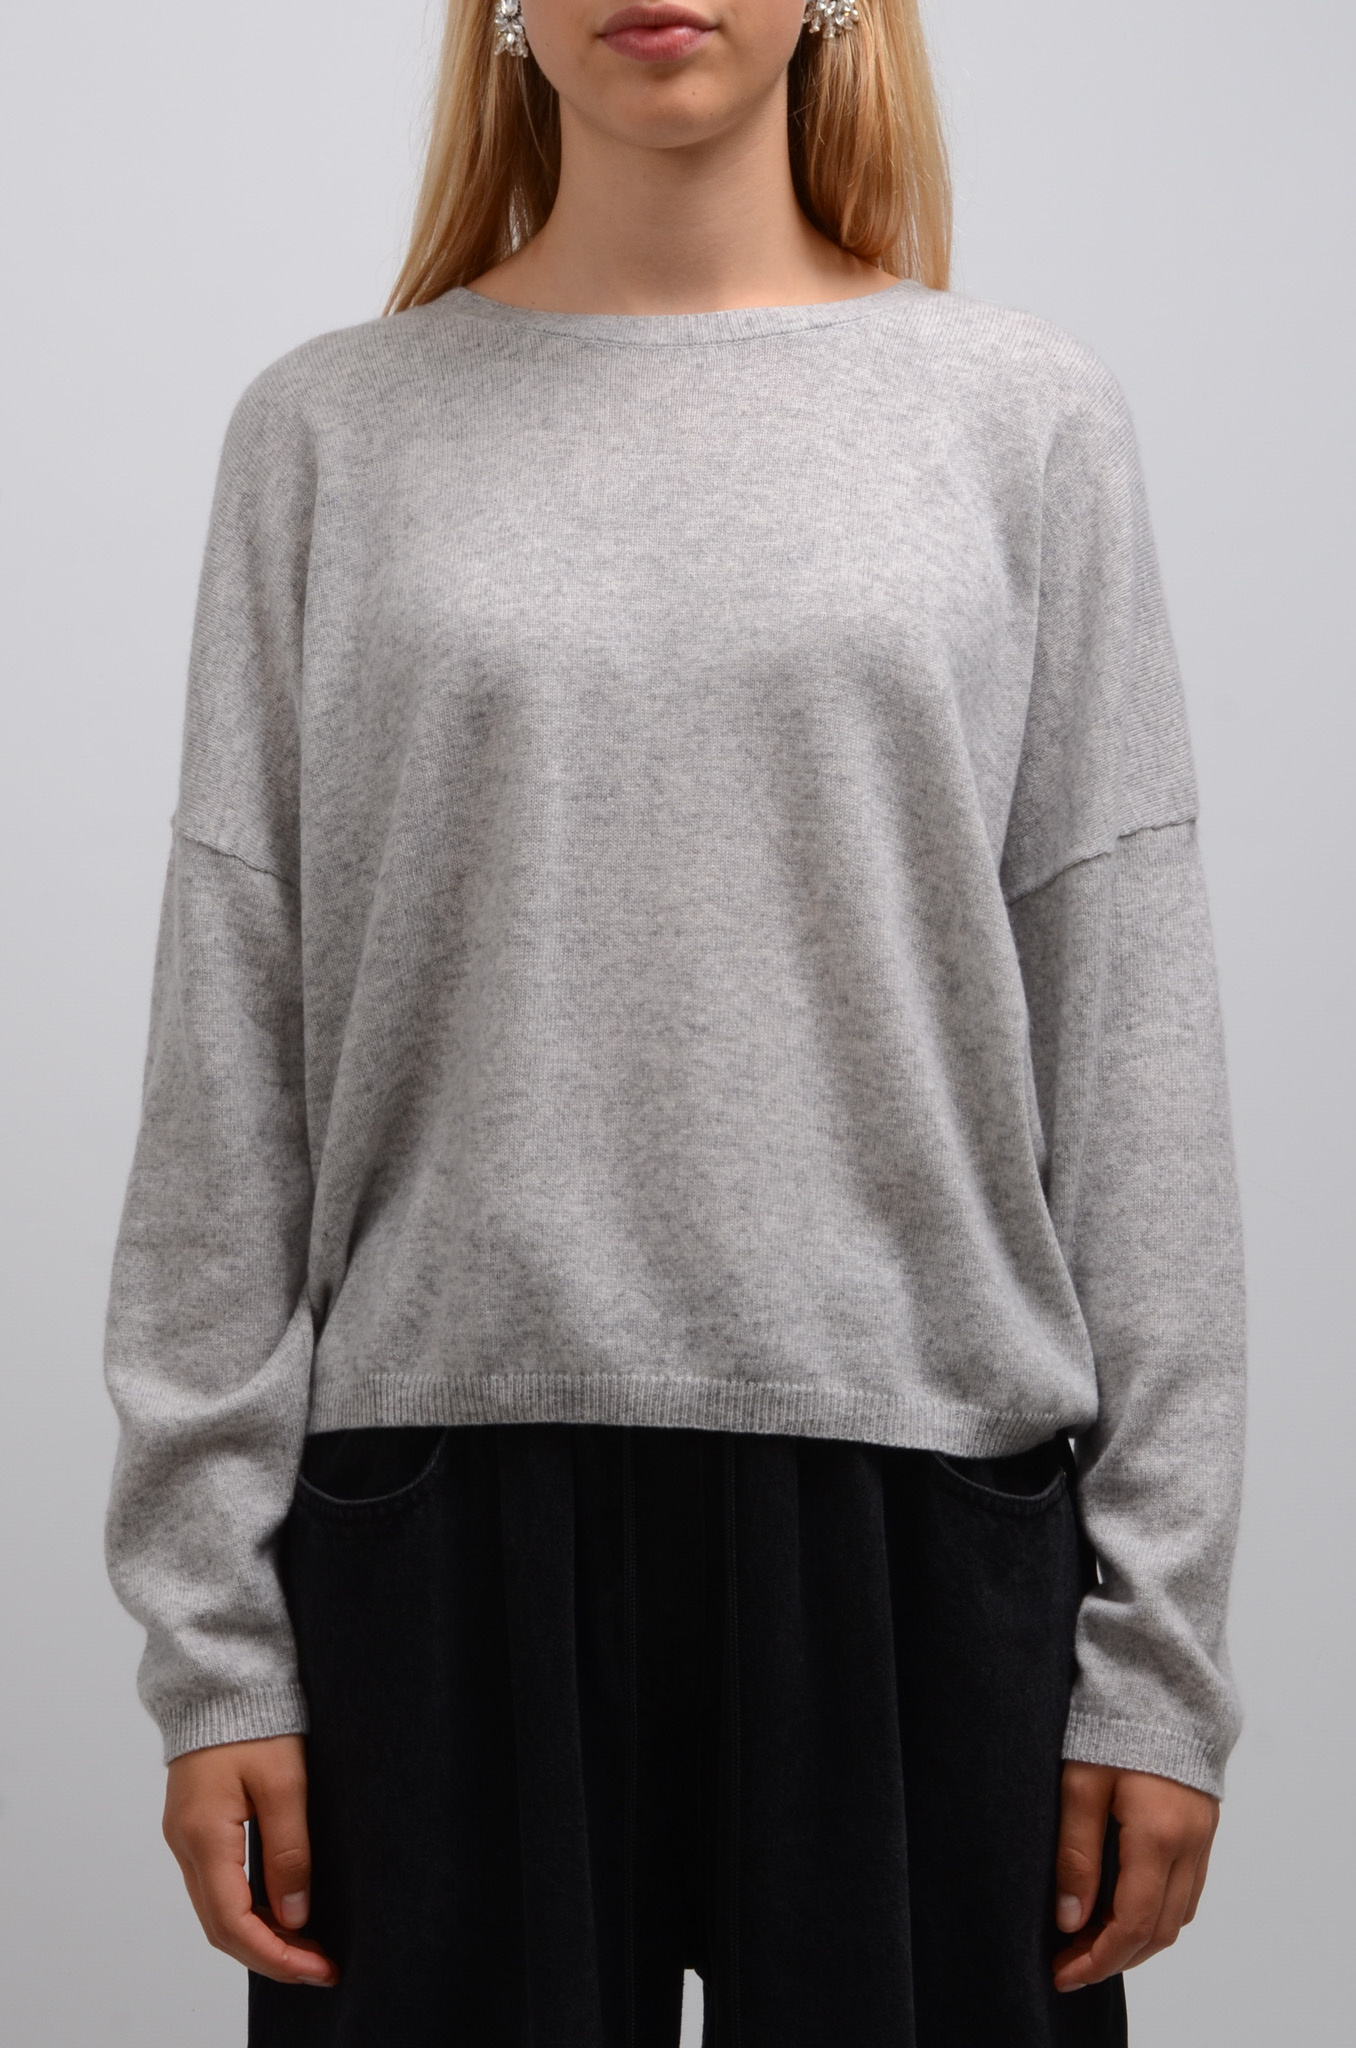 Kaira Cashmere Knit in Gris Chine Clair-3